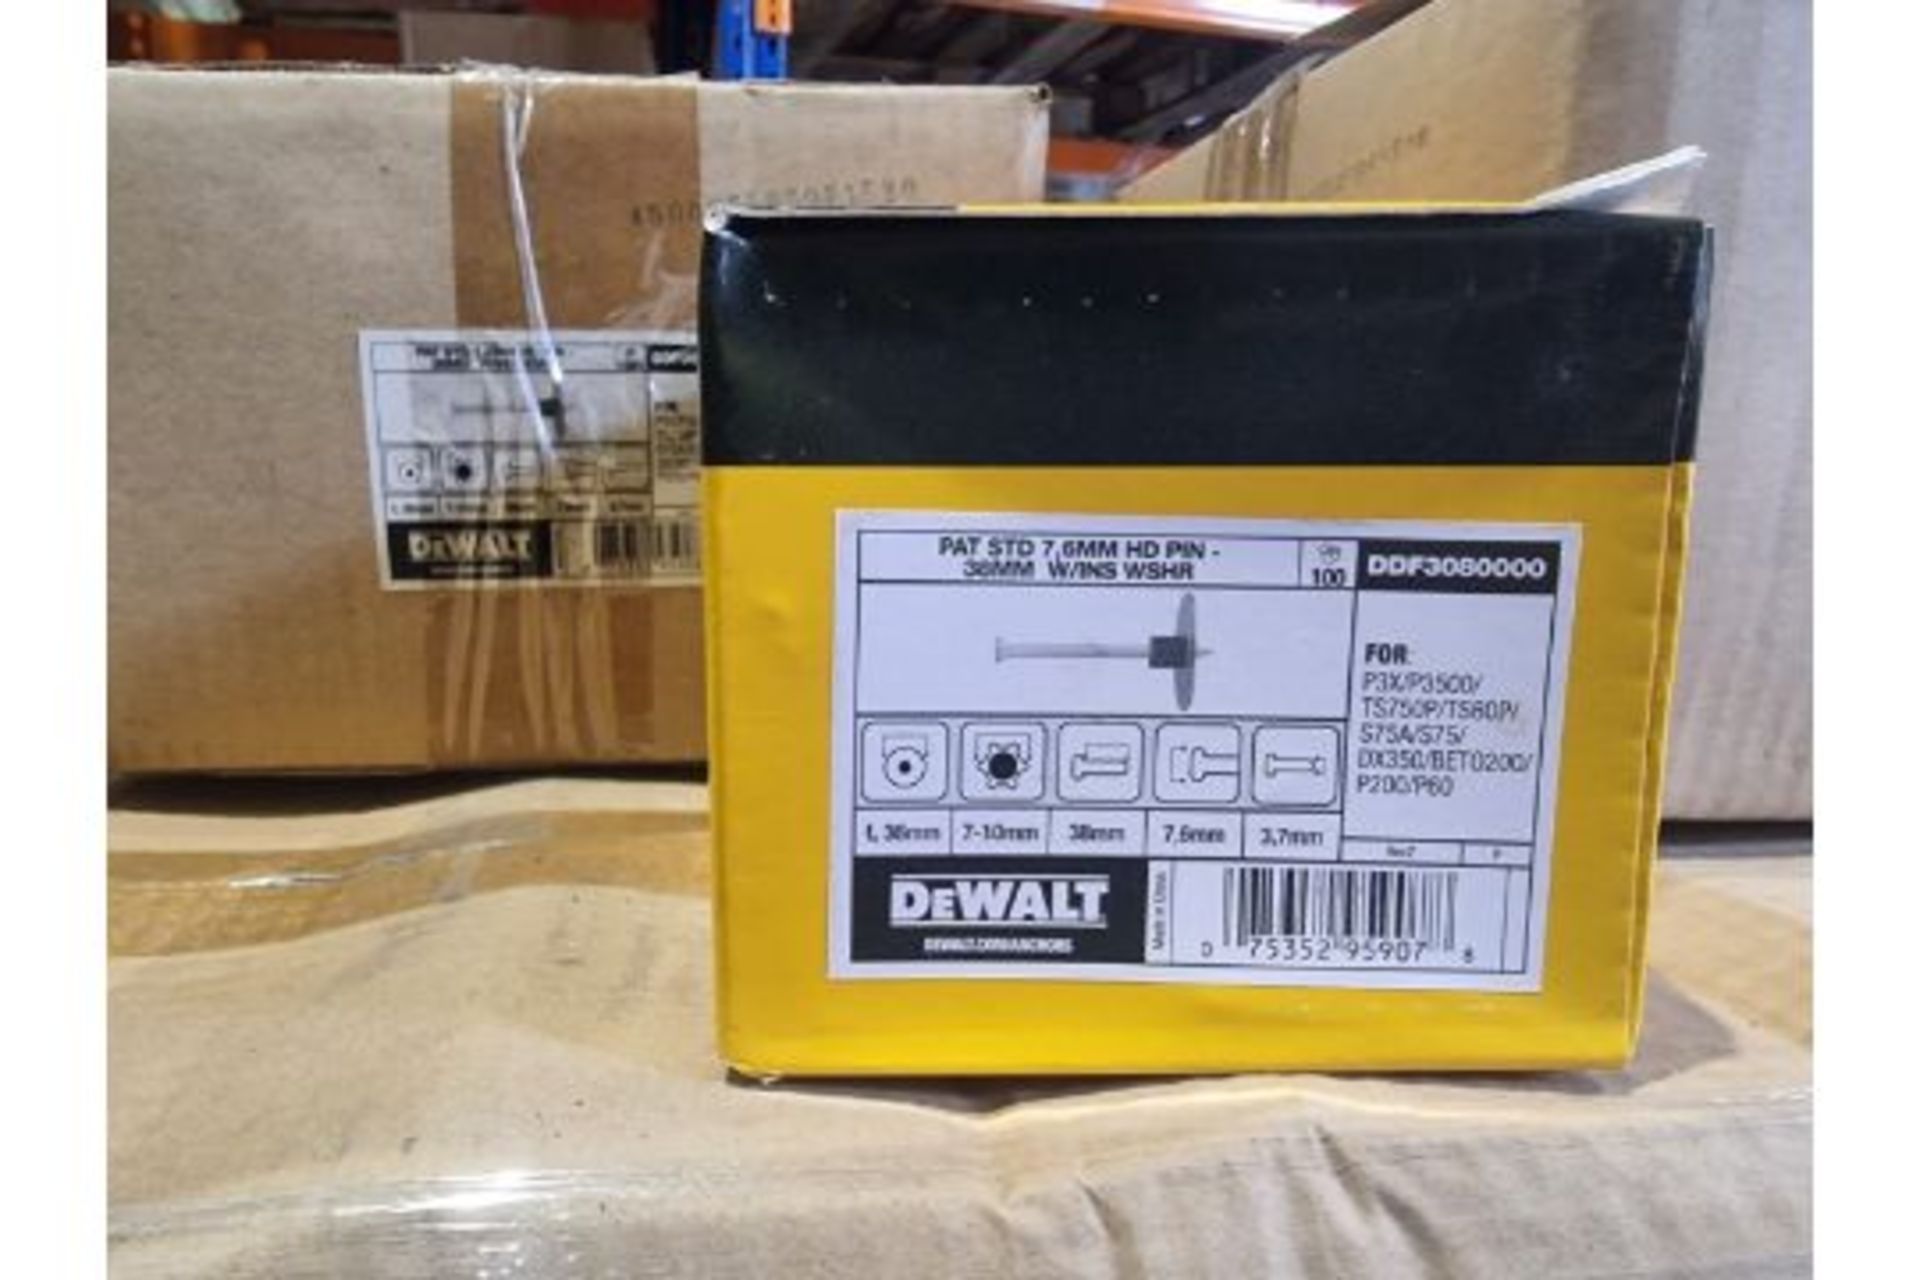 Trade Lot 110 x New Boxes of 100 Dewalt DDF3080000 DRIVE PIN 38MM INSULATION WASHER. RRP £19.54